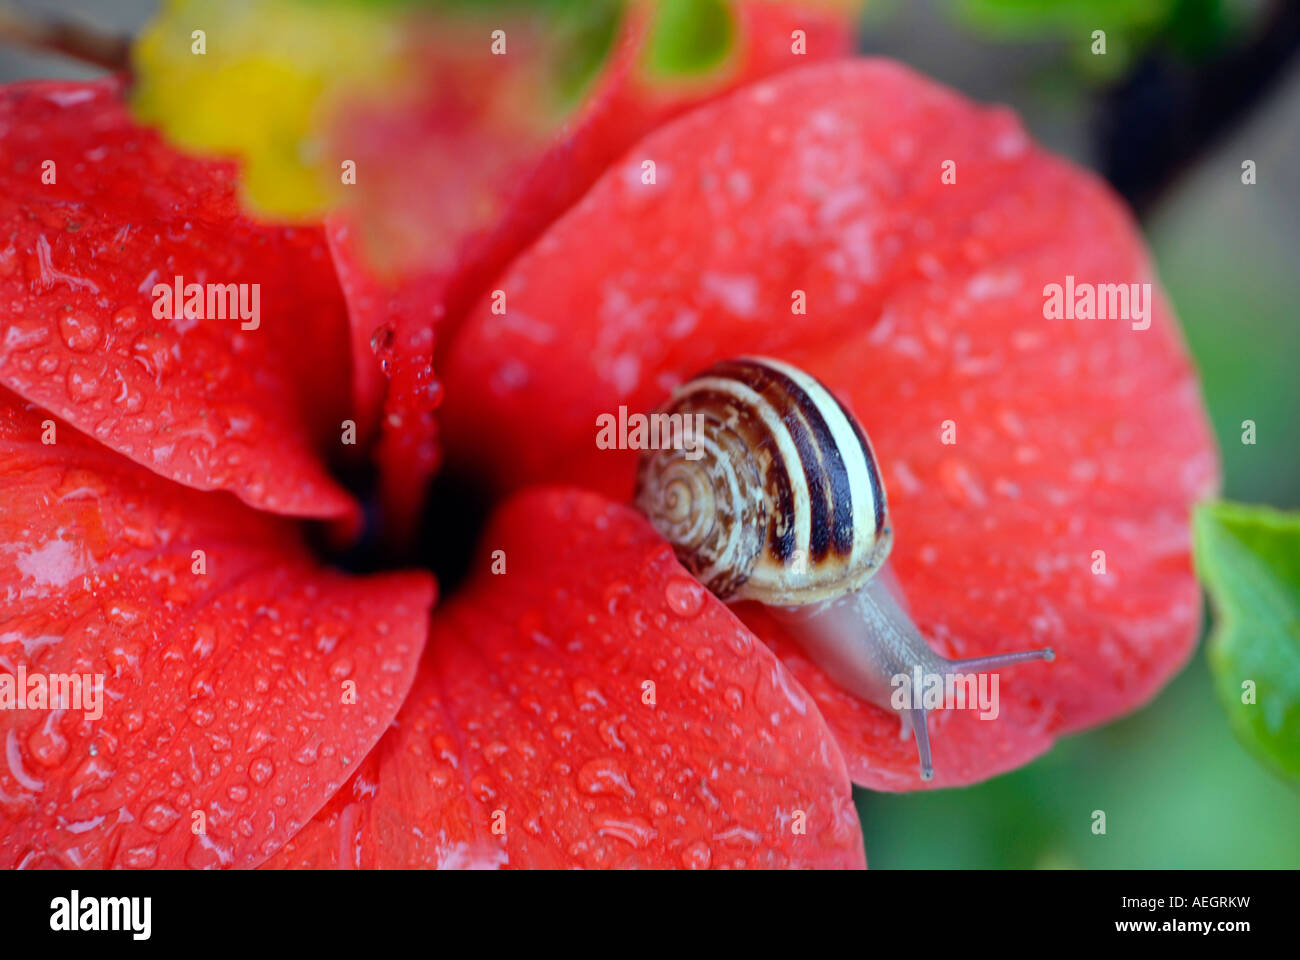 A snail on a red flower after the rain Stock Photo